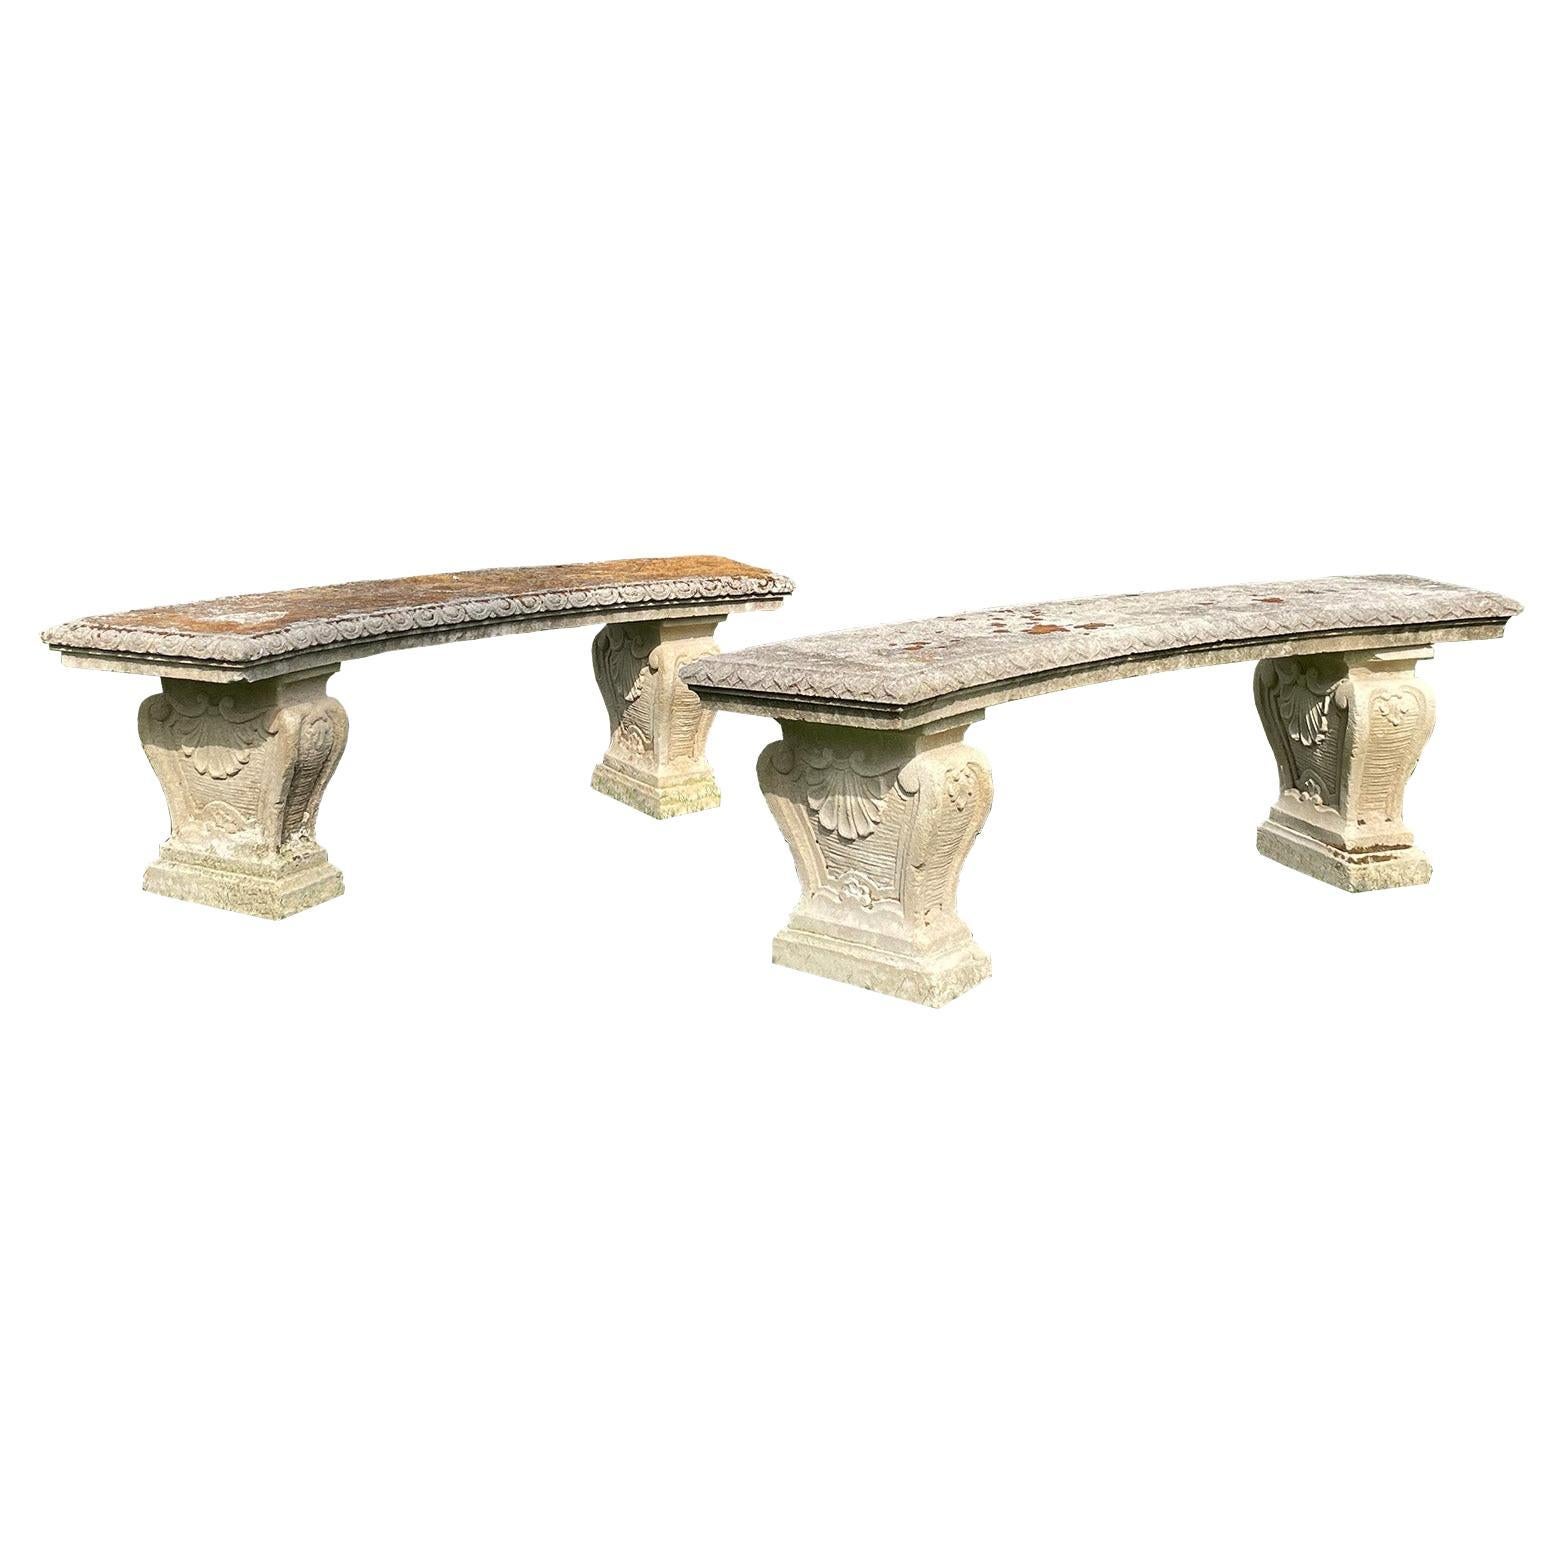 Pair of Semi-Circular Carved Stone Benches